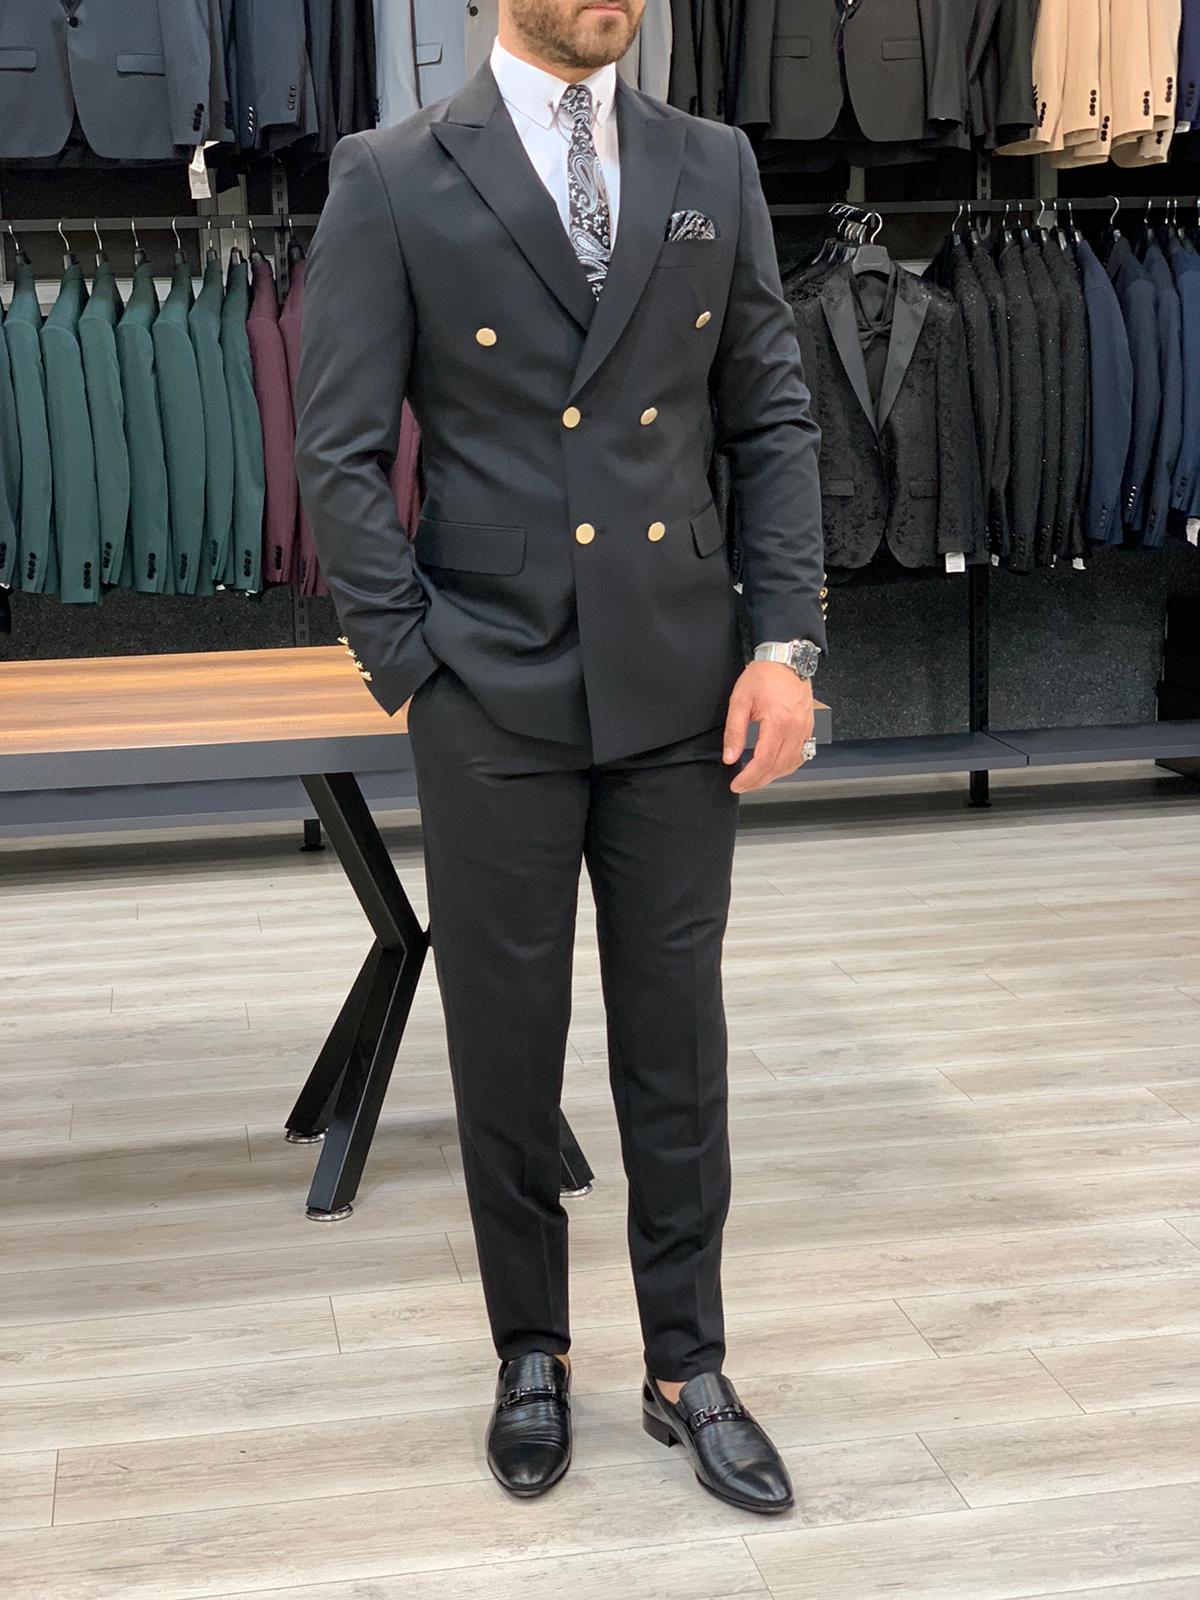 Vins Black Double Breasted Suit